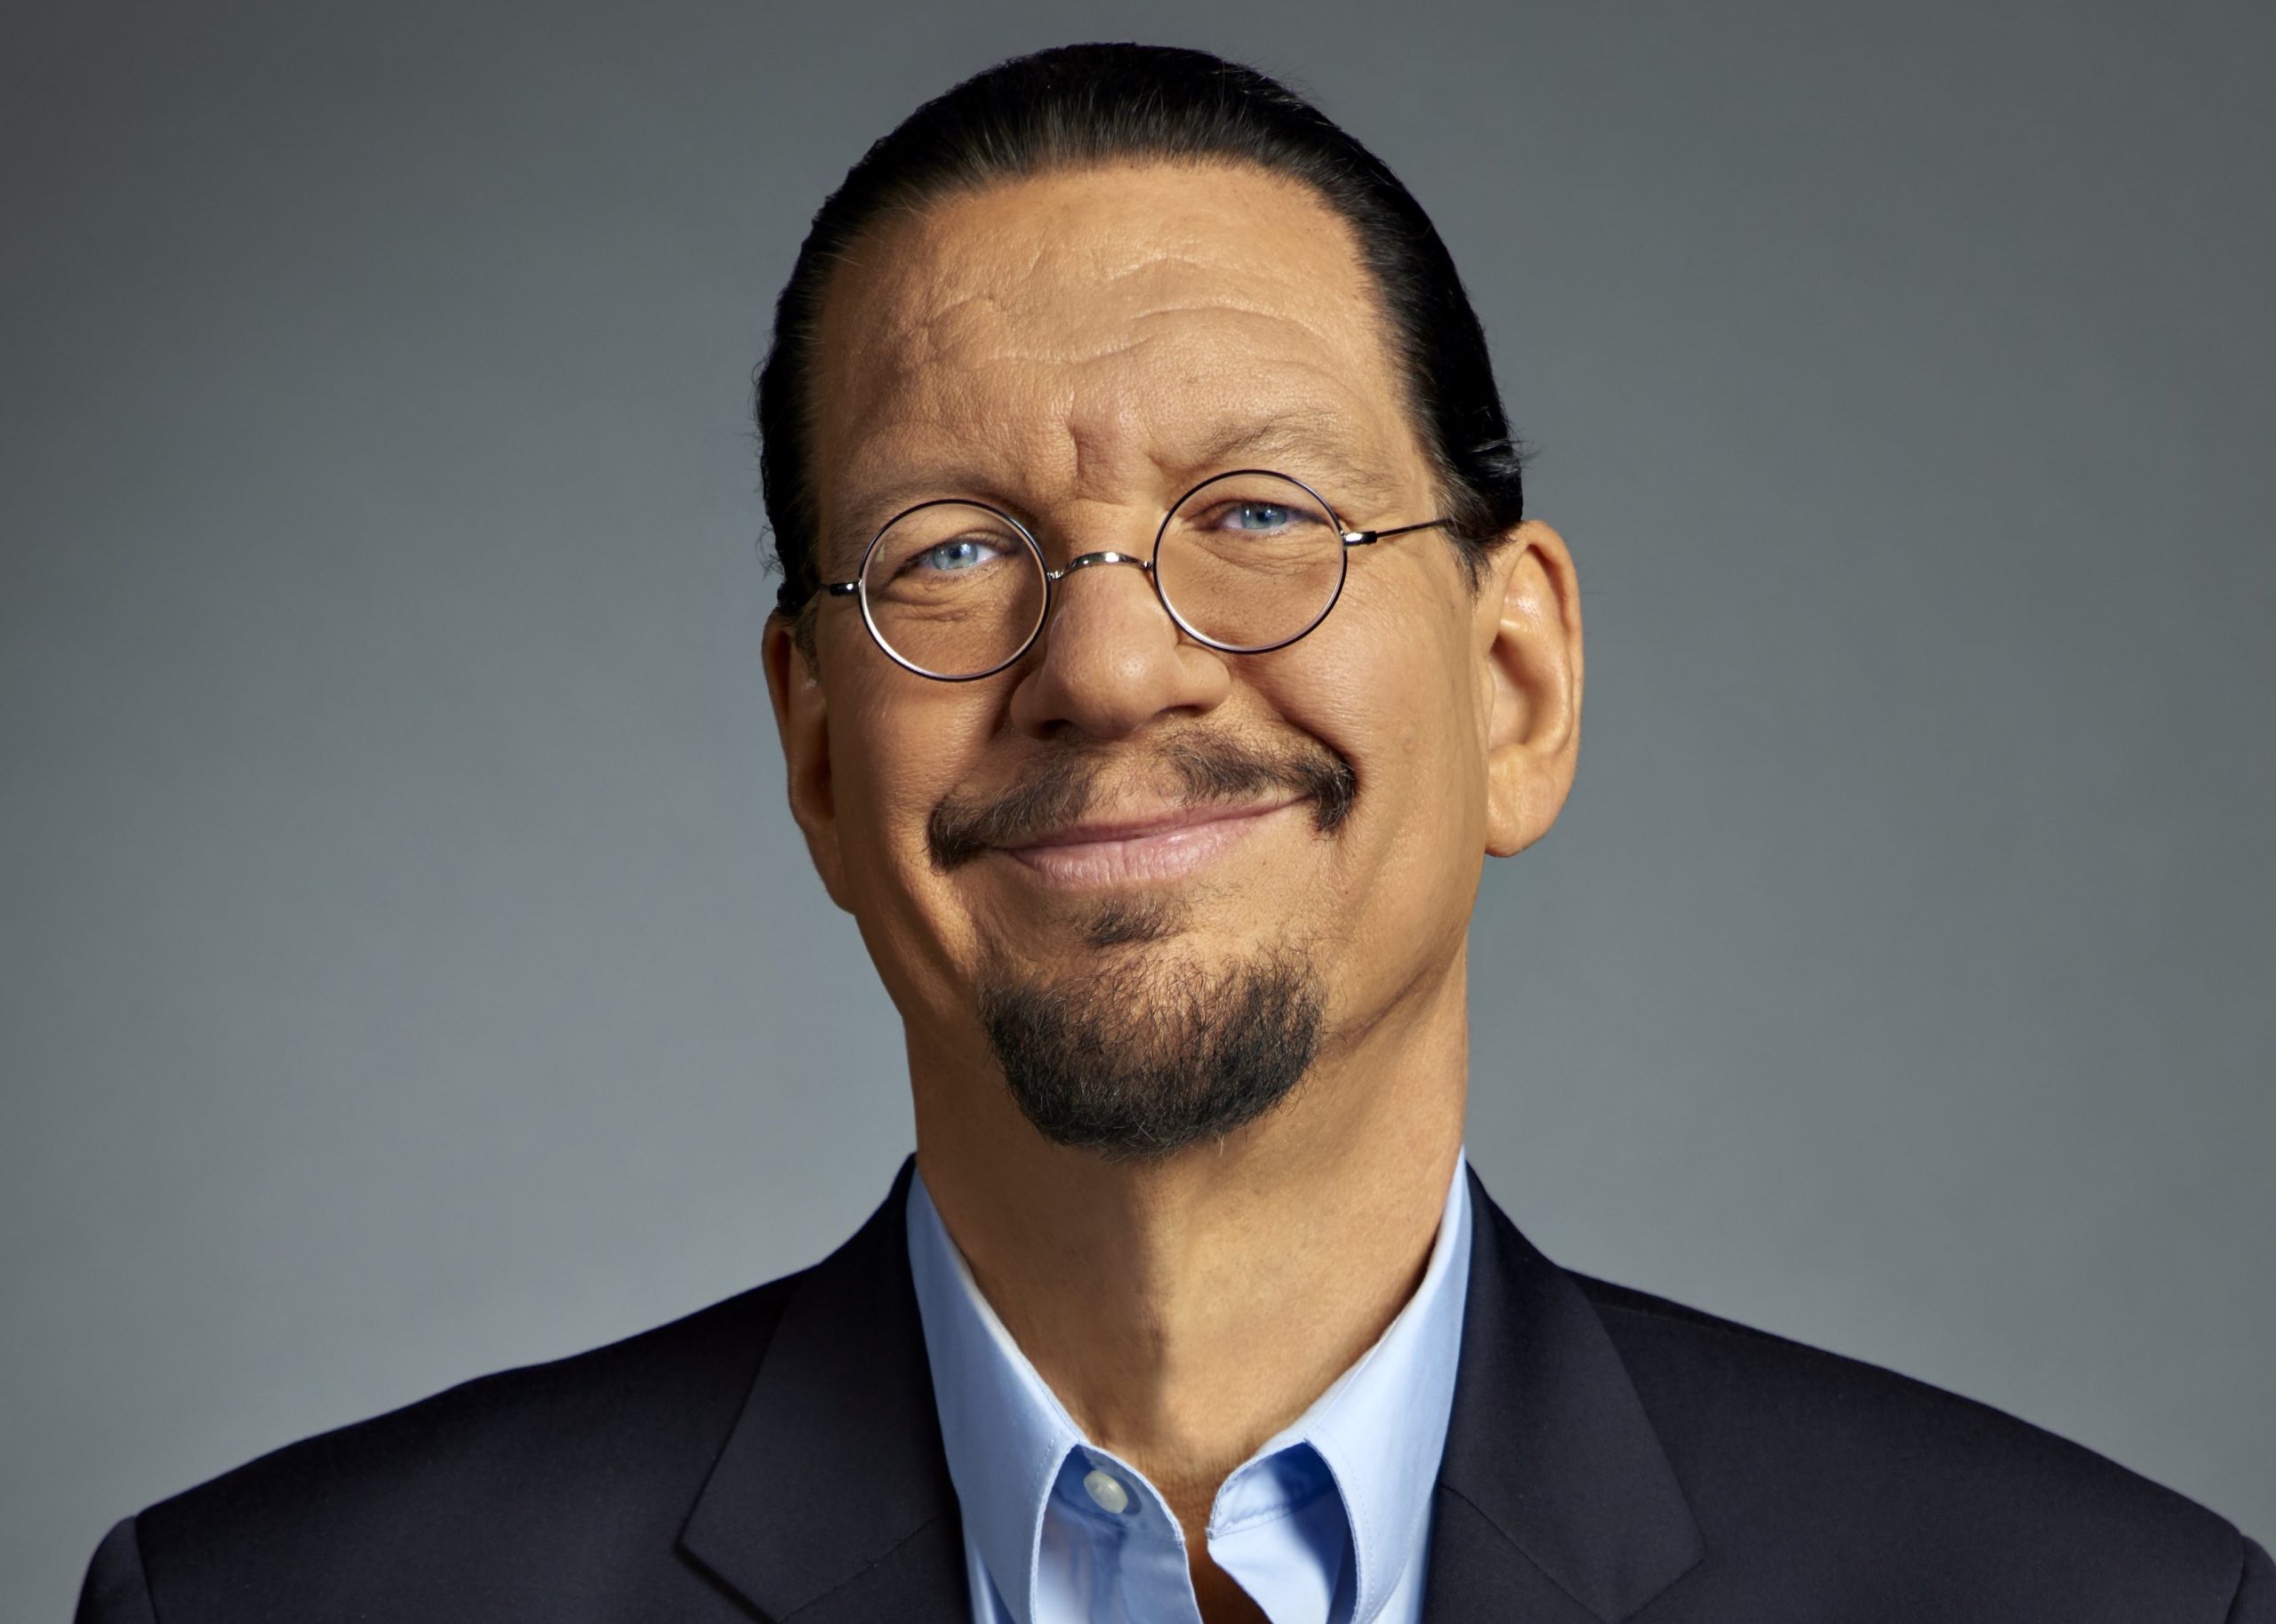 Penn Jillette on Magic, Losing 100+ Pounds, and Weaponizing Kindness